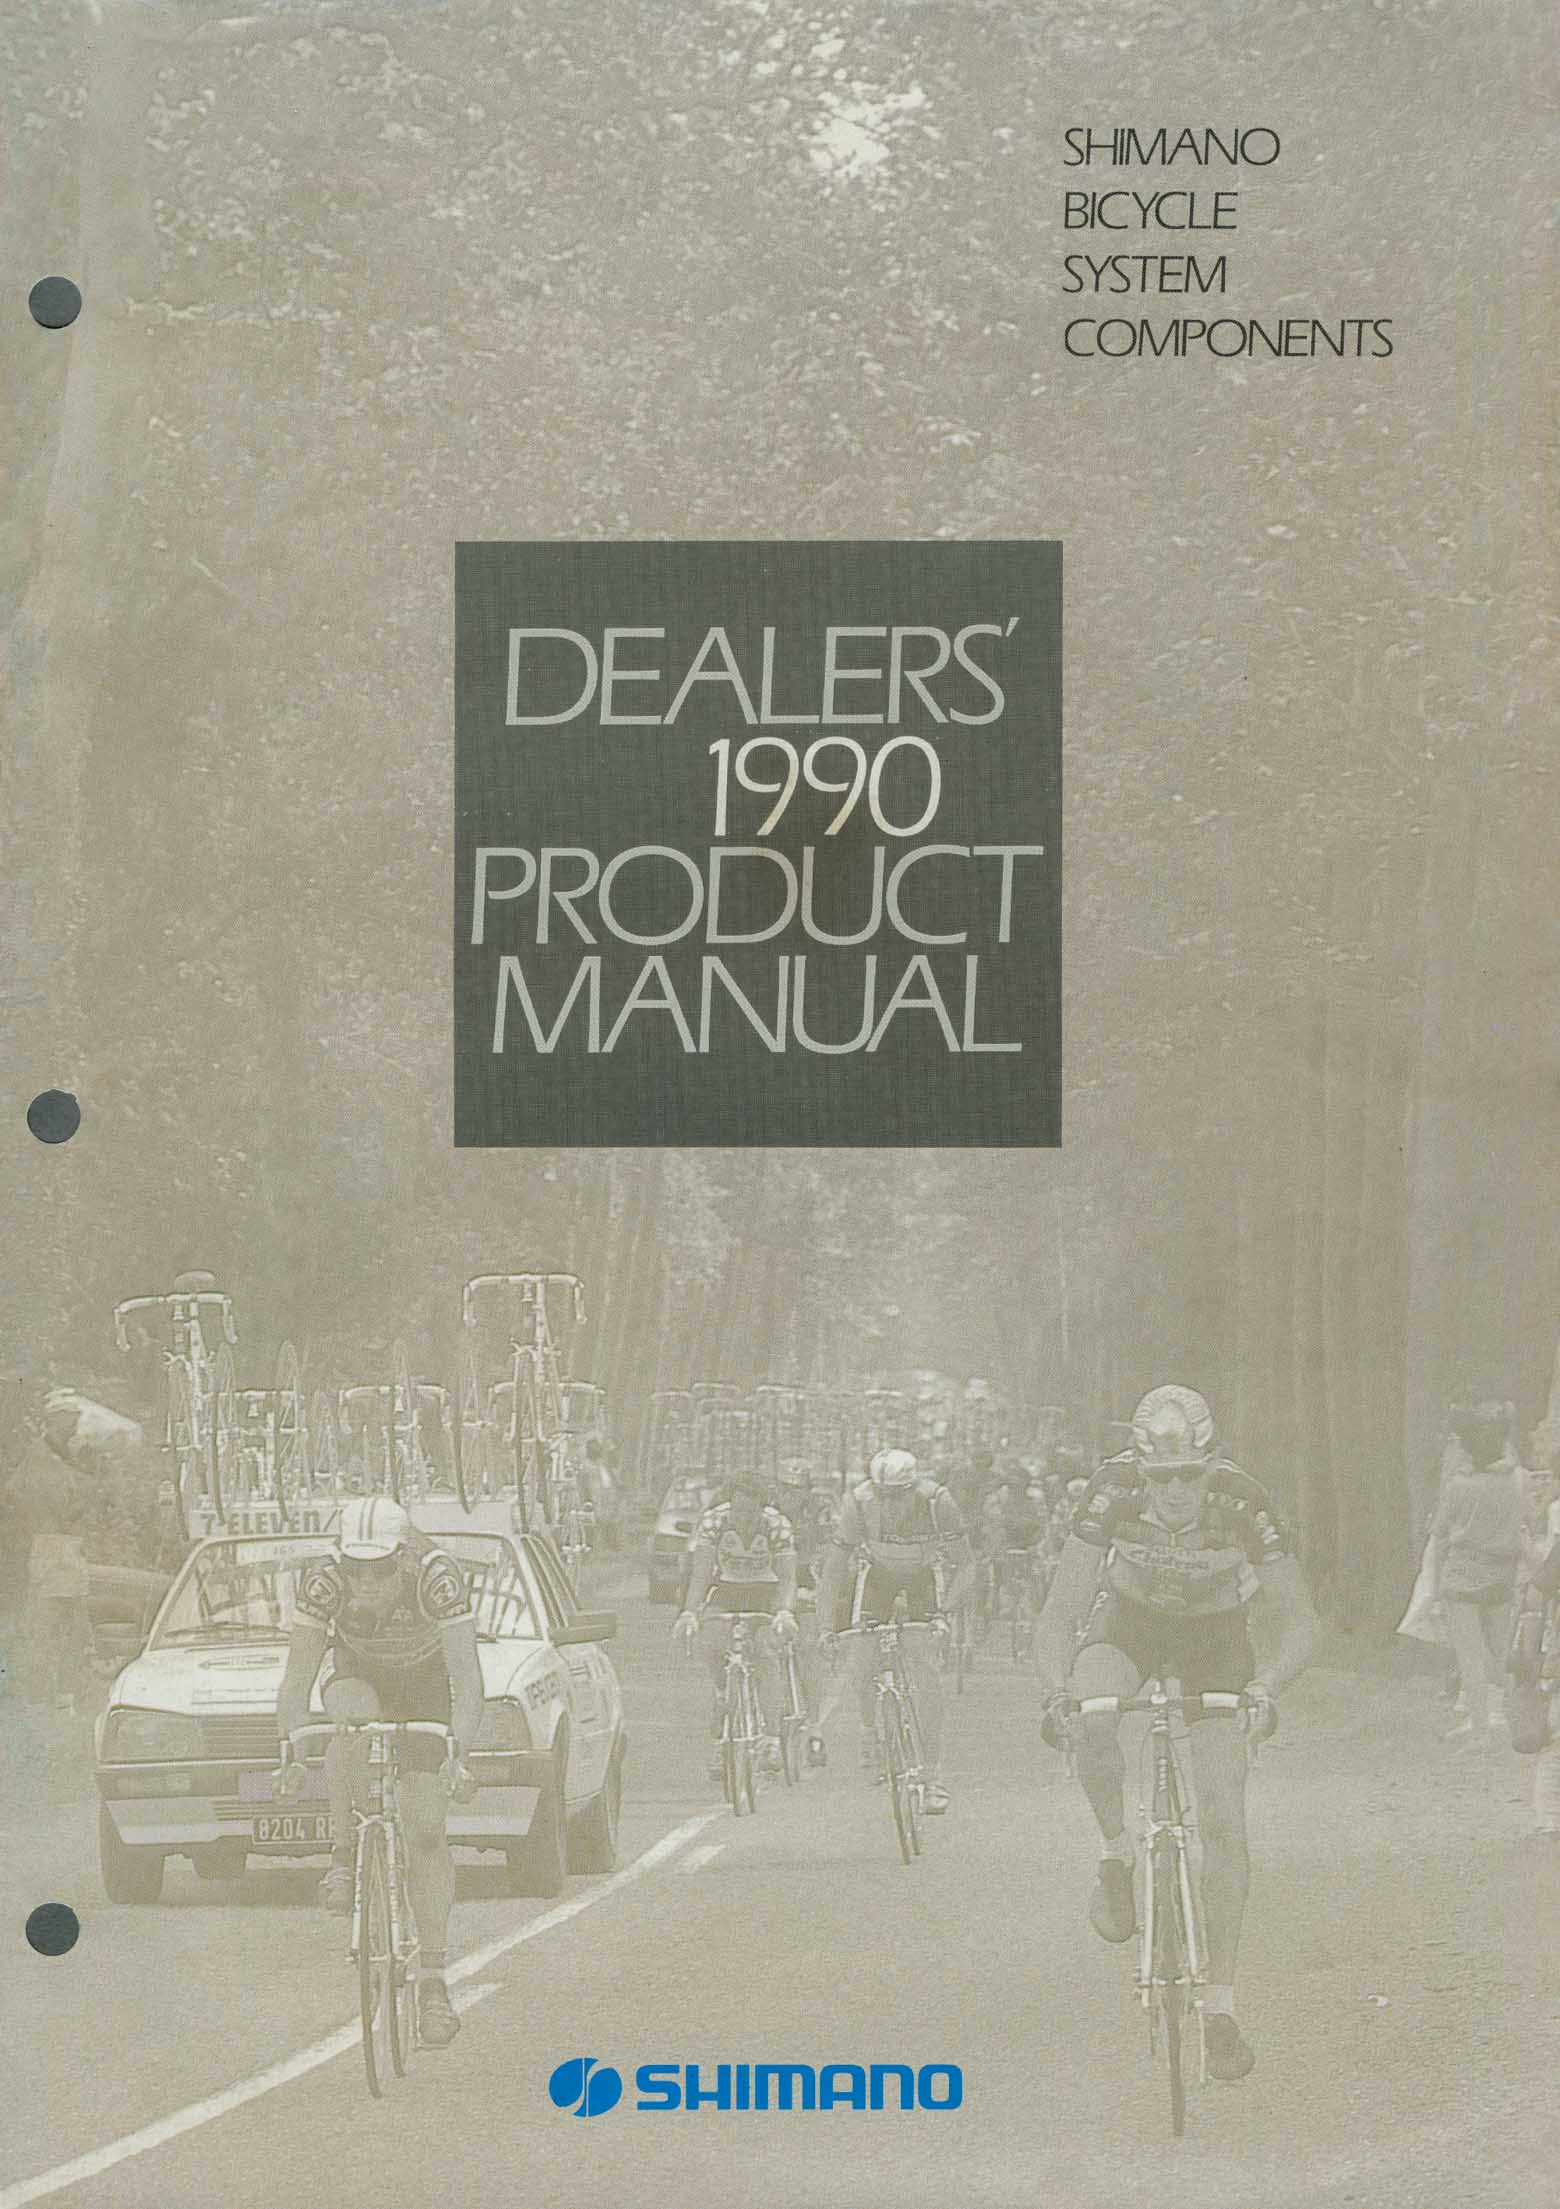 Shimano - Dealers' 1990 Product Manual front cover main image